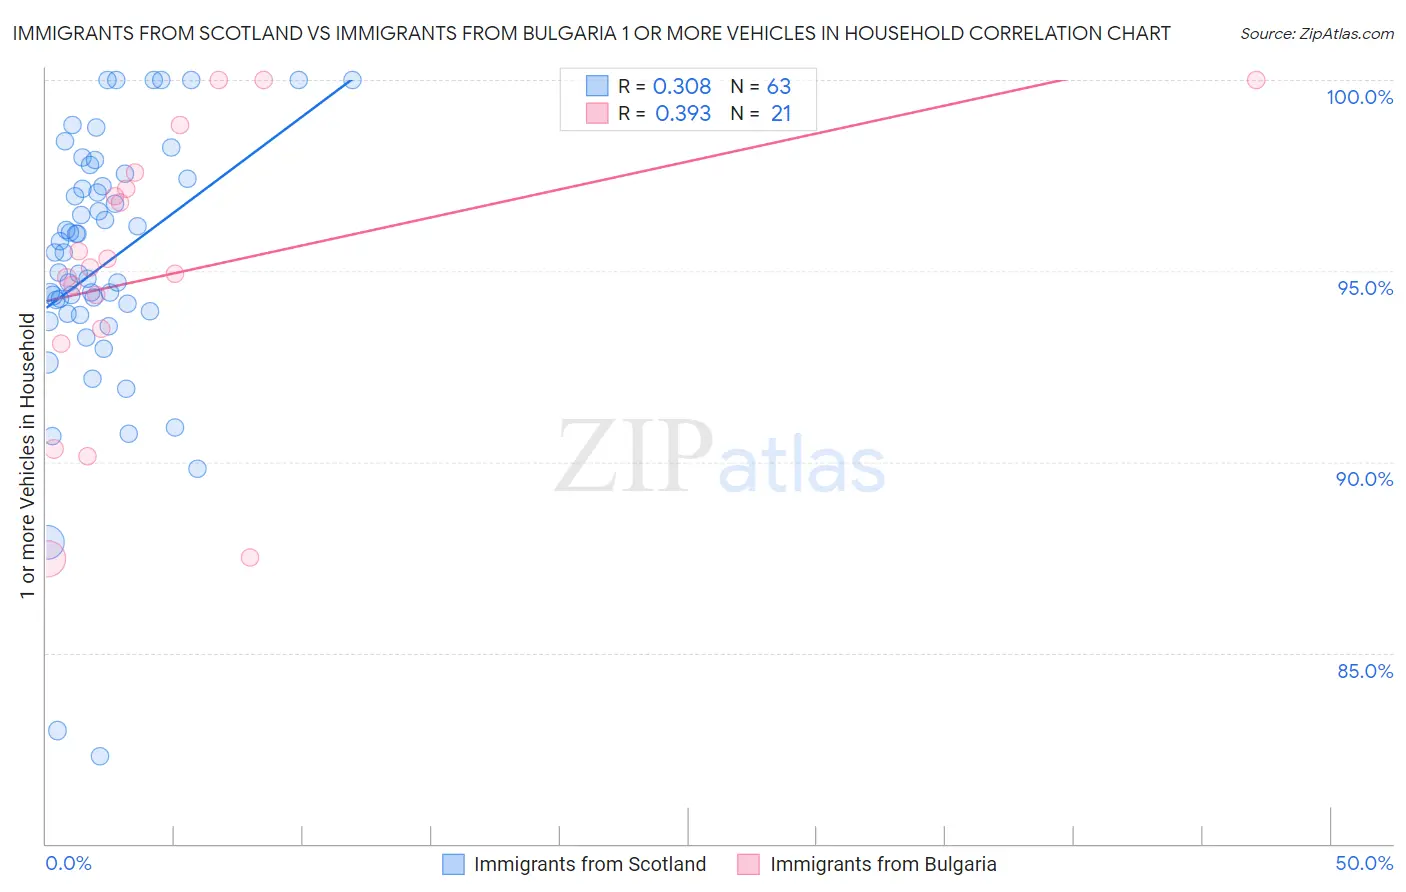 Immigrants from Scotland vs Immigrants from Bulgaria 1 or more Vehicles in Household